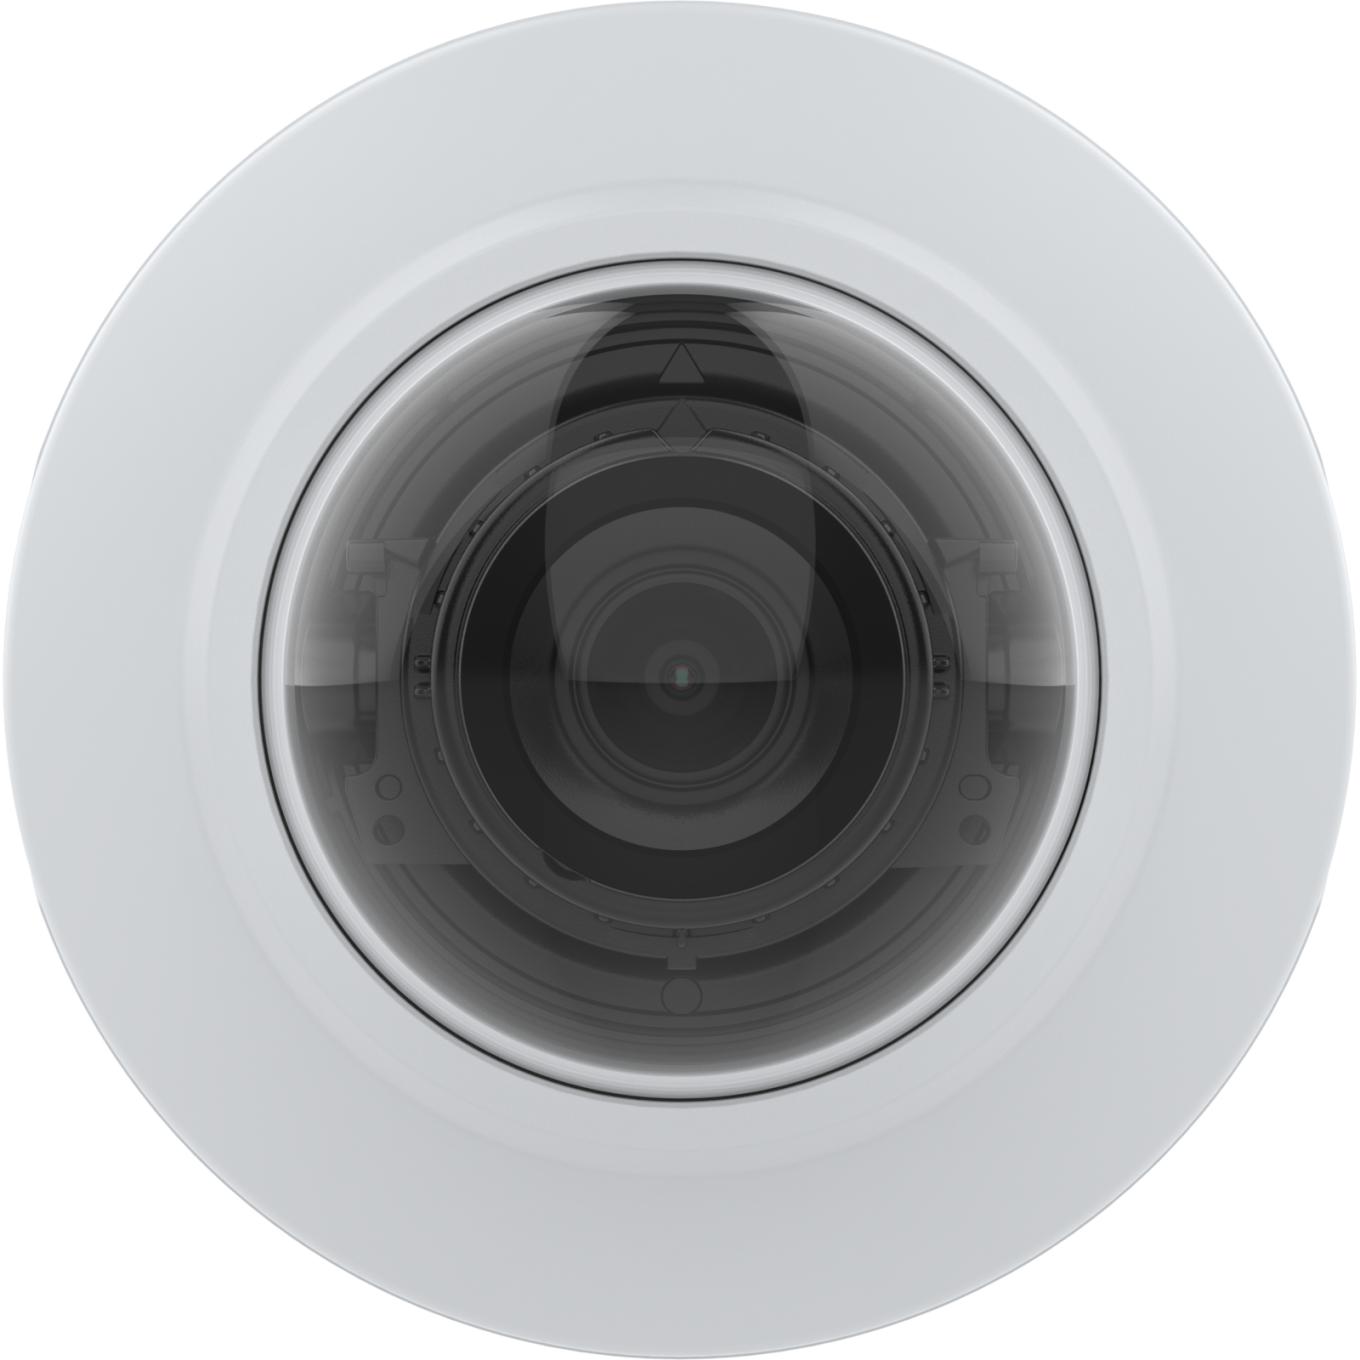 AXIS M4216-V Dome Camera、壁面設置、正面から見た図